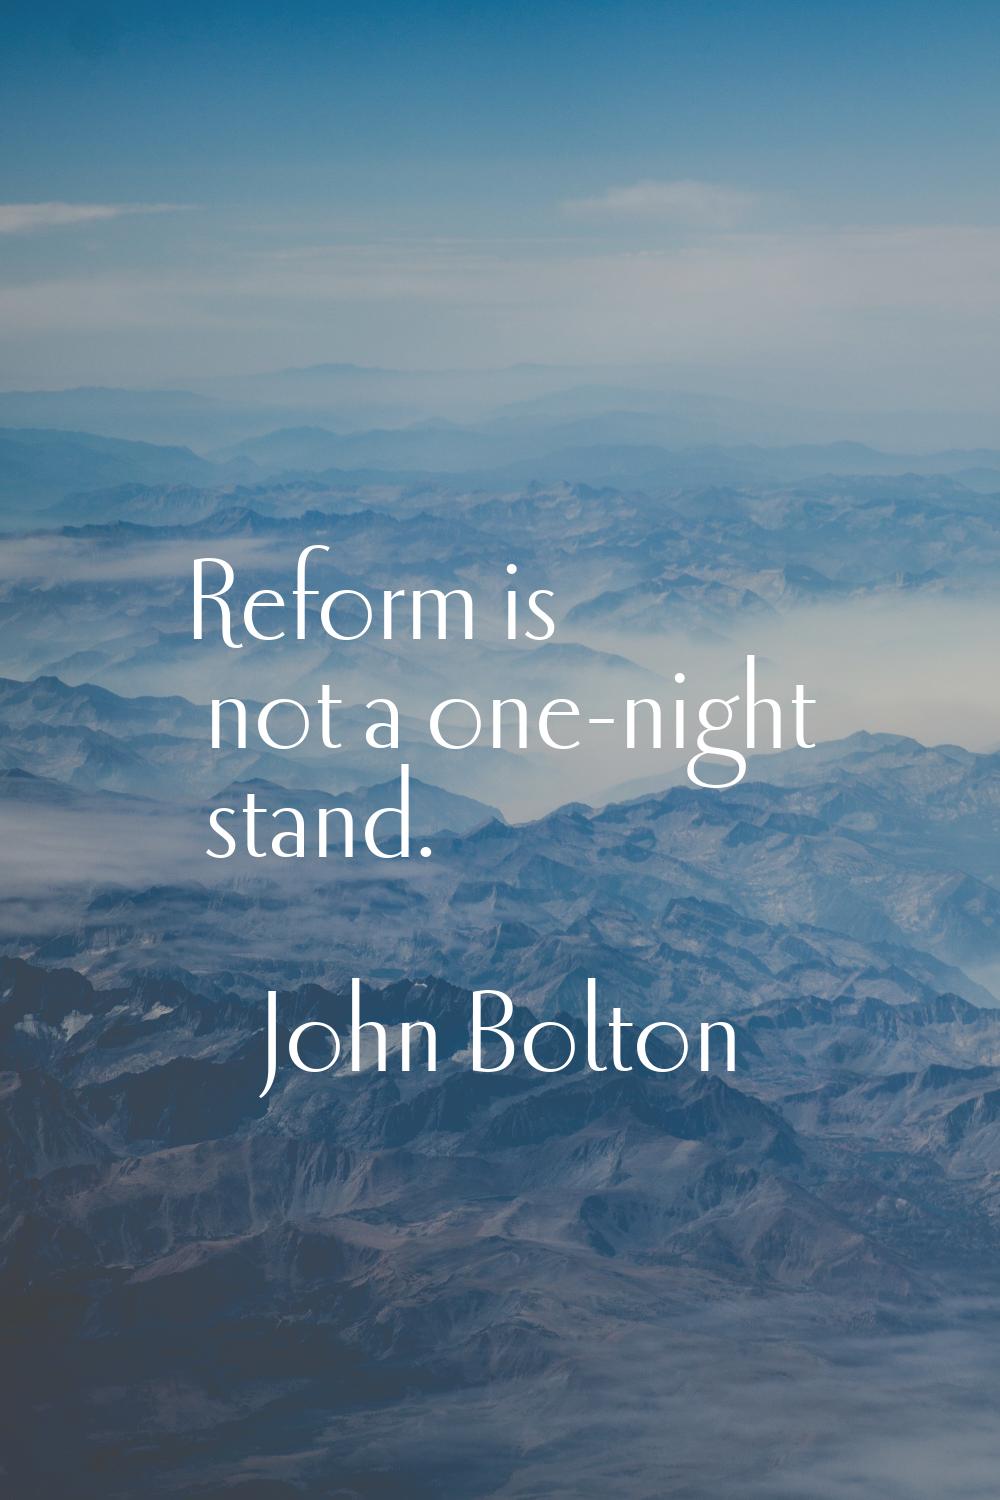 Reform is not a one-night stand.